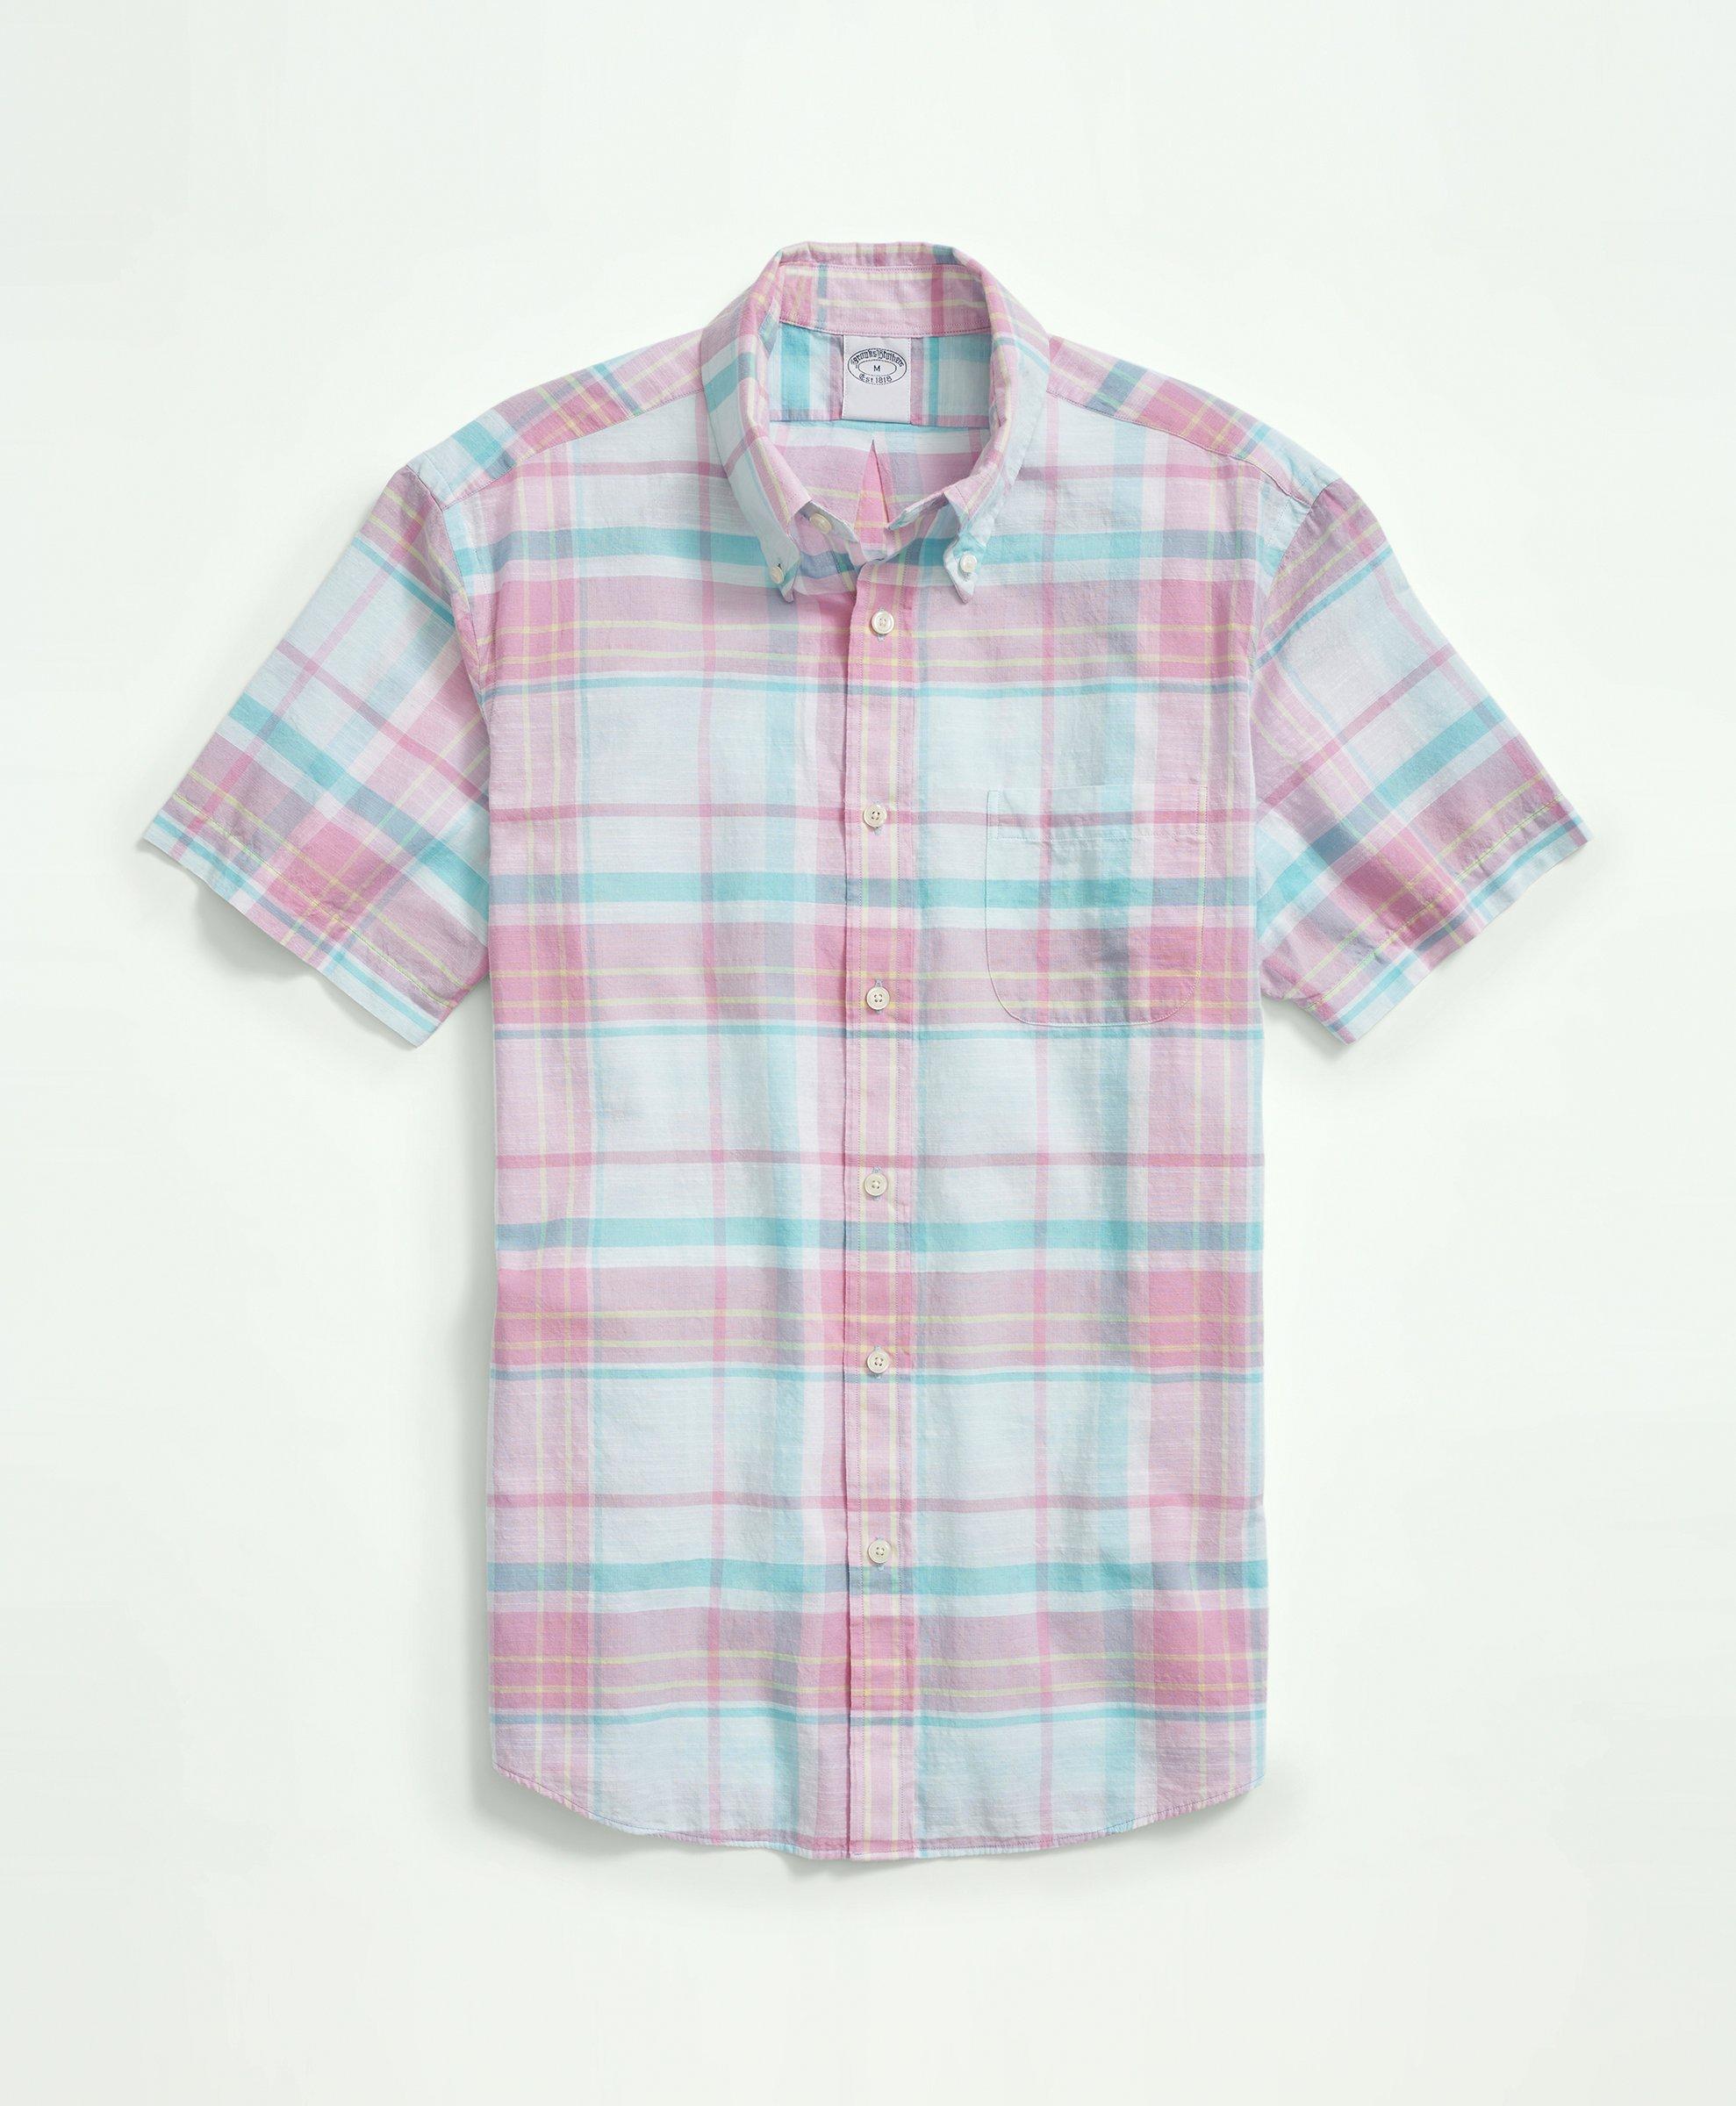 Washed Cotton Madras Button-Down Collar Short-Sleeve Sport Shirt, image 1